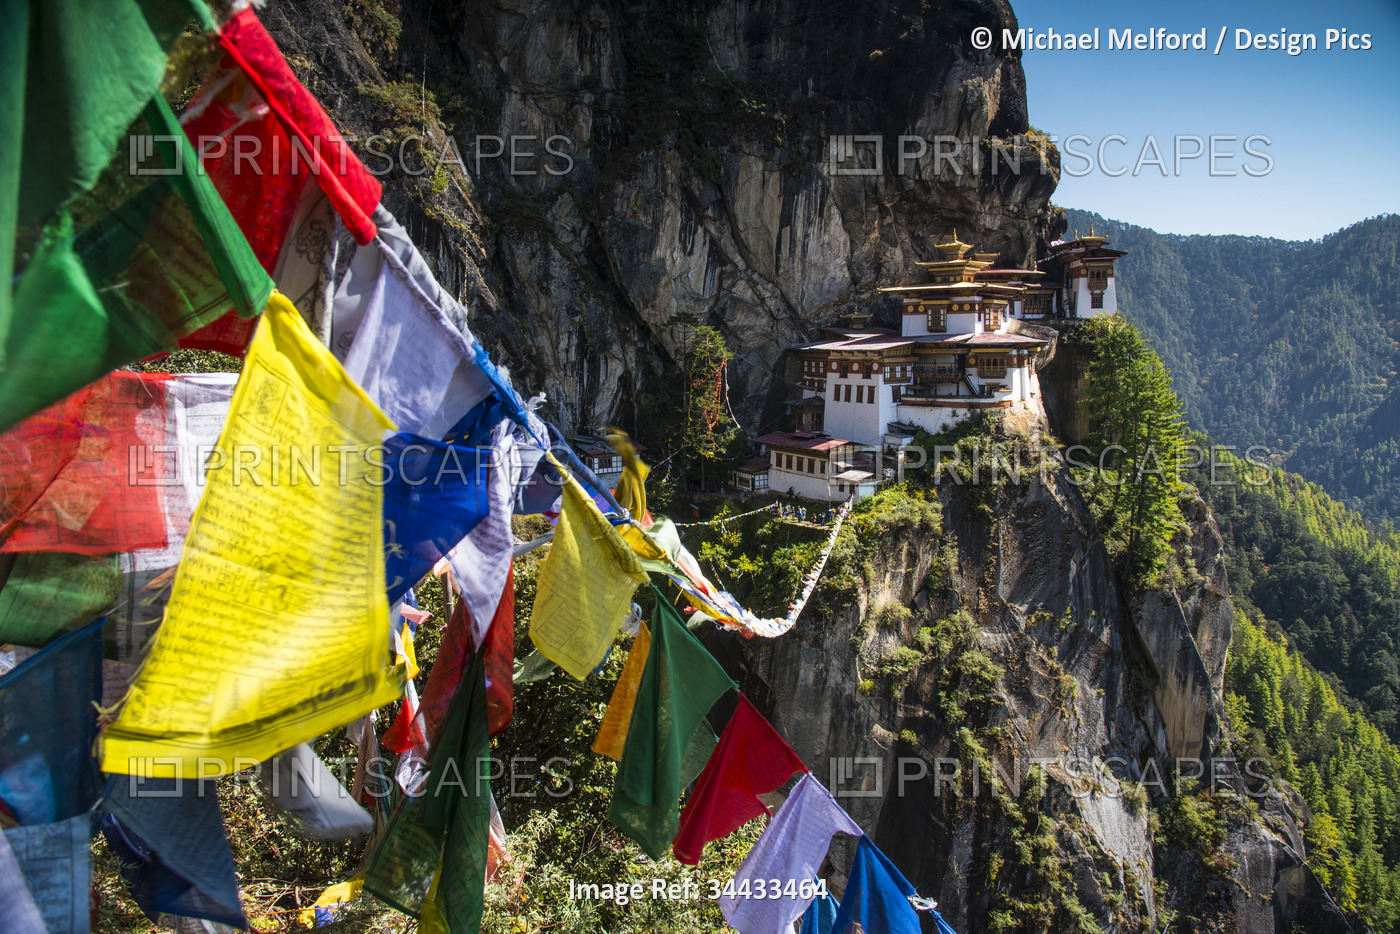 Prayer flags span the chasm before the Tiger's Nest Monastery in the Himalayas ...